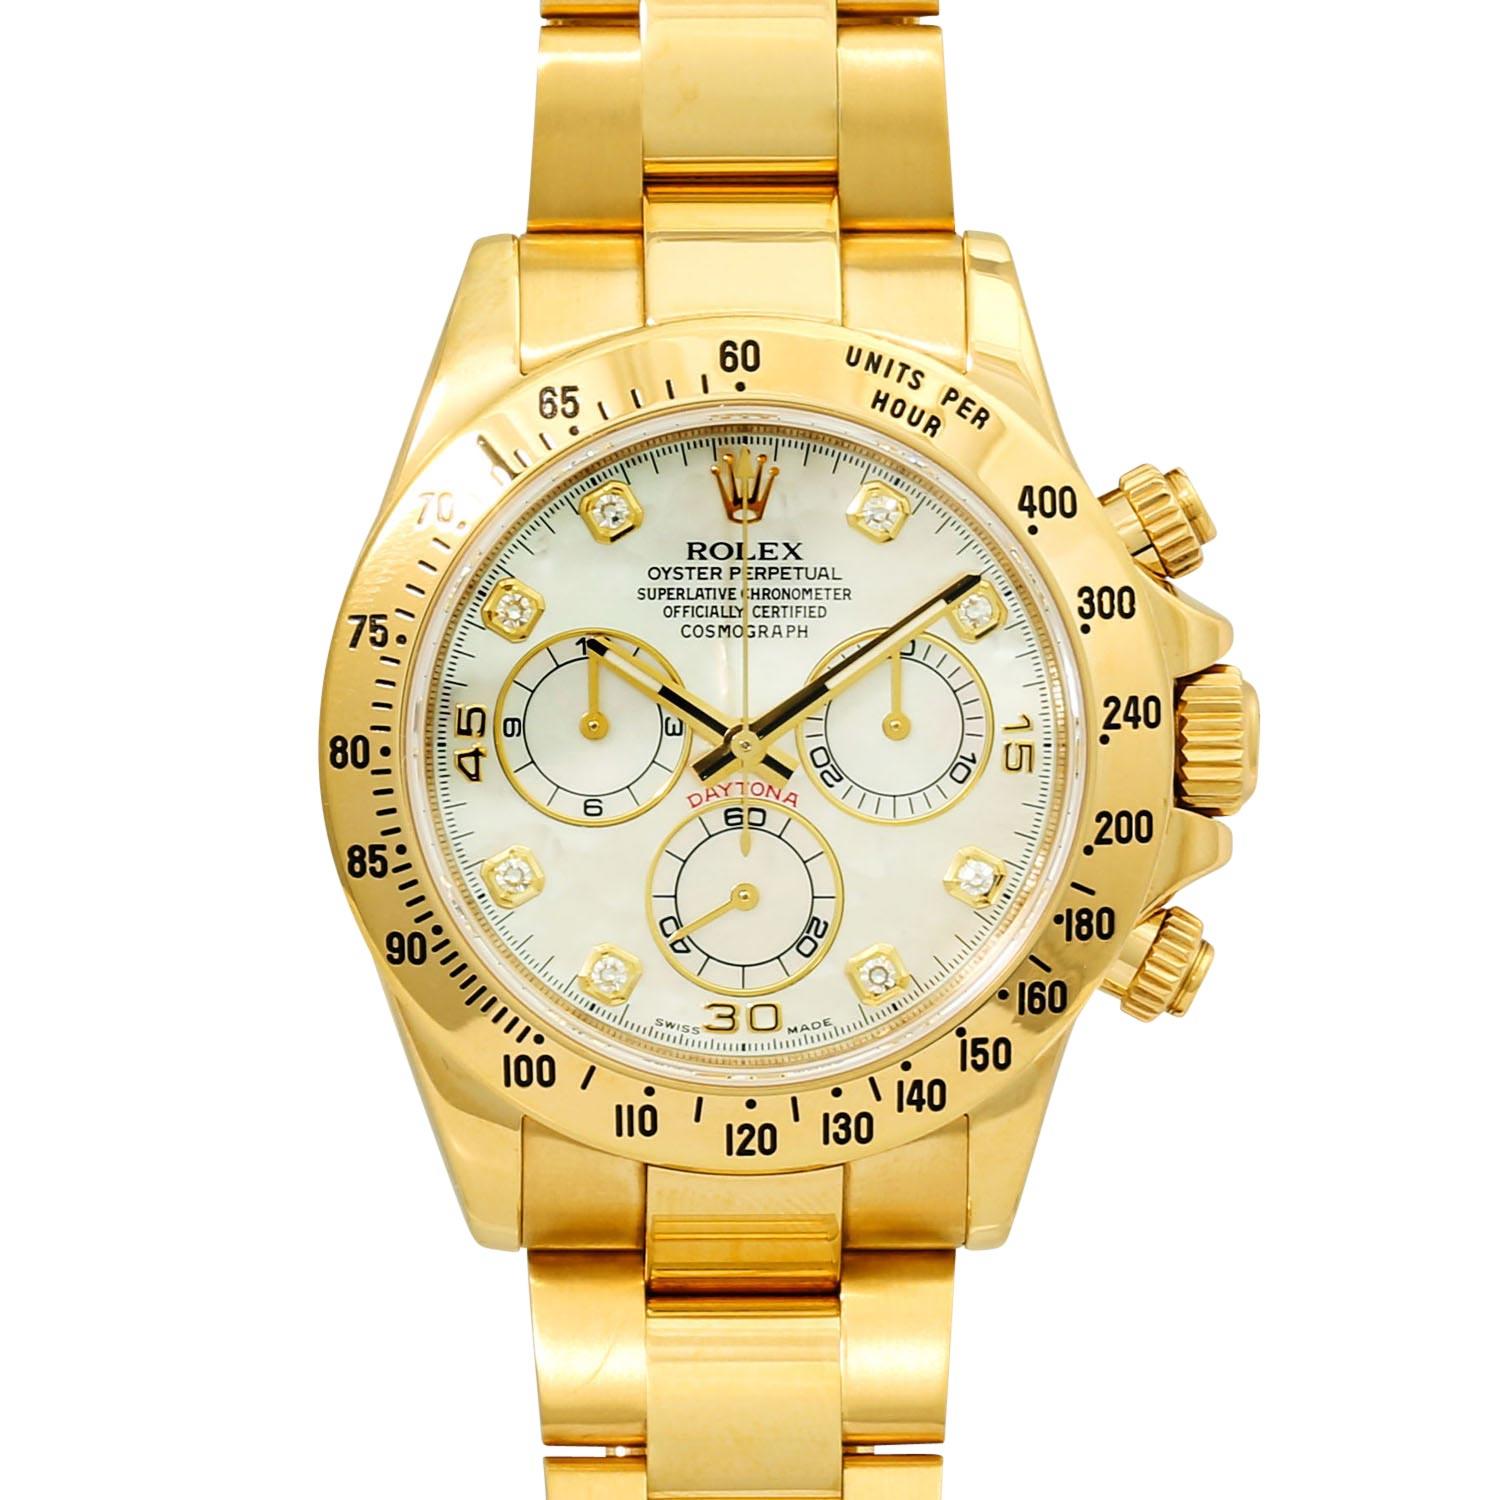 Rolex Daytona 116528 46mm Yellow gold Mother-of-pearl